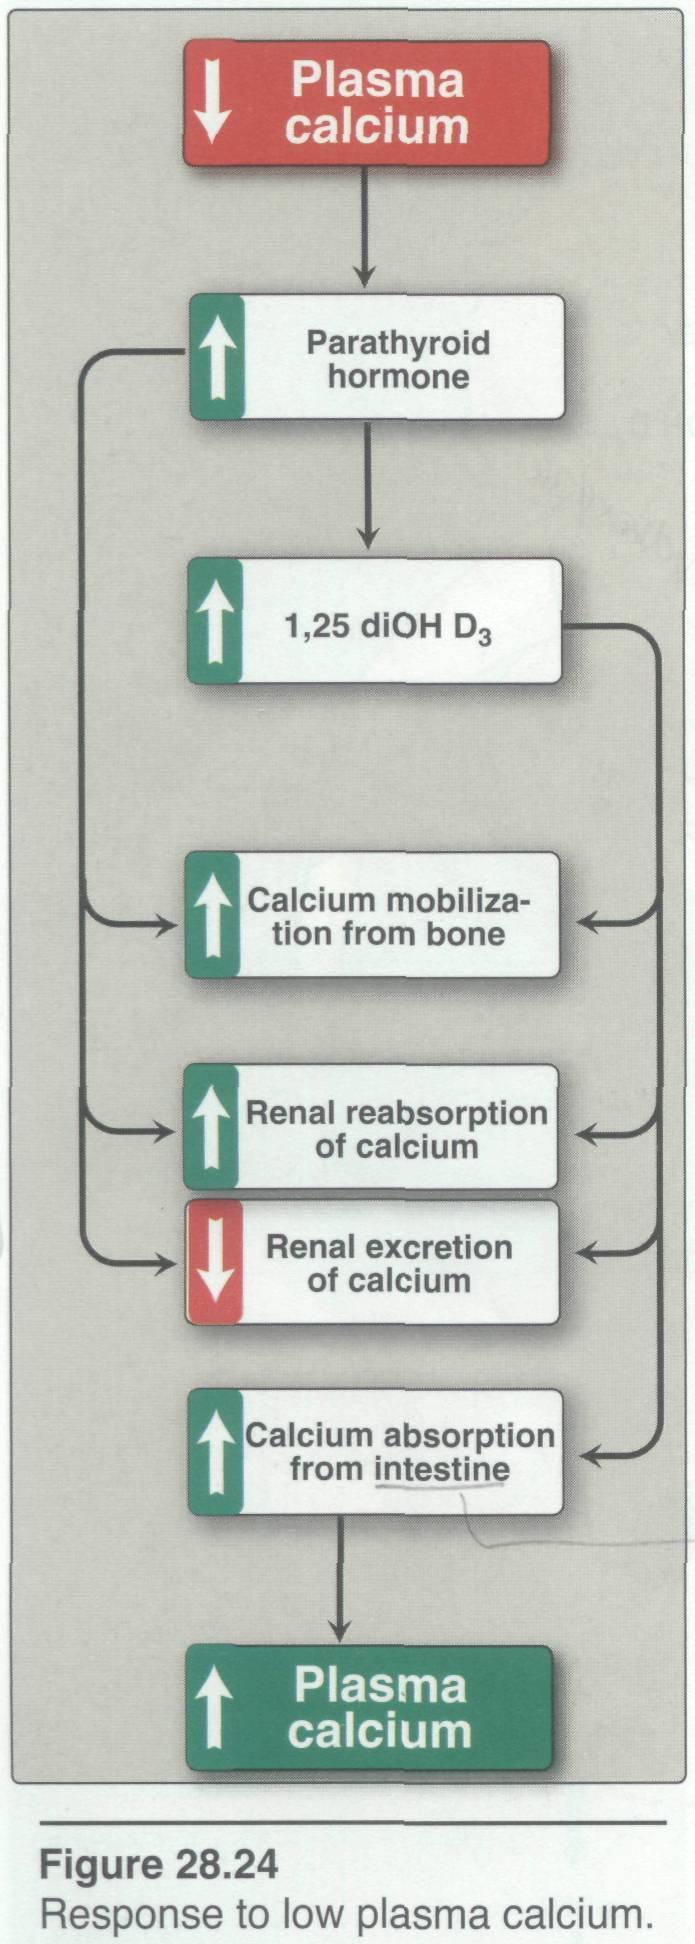 Important note from the figure: PTH does not increase the absorption of calcium from the intestine. (Only vitamin D does this) E.